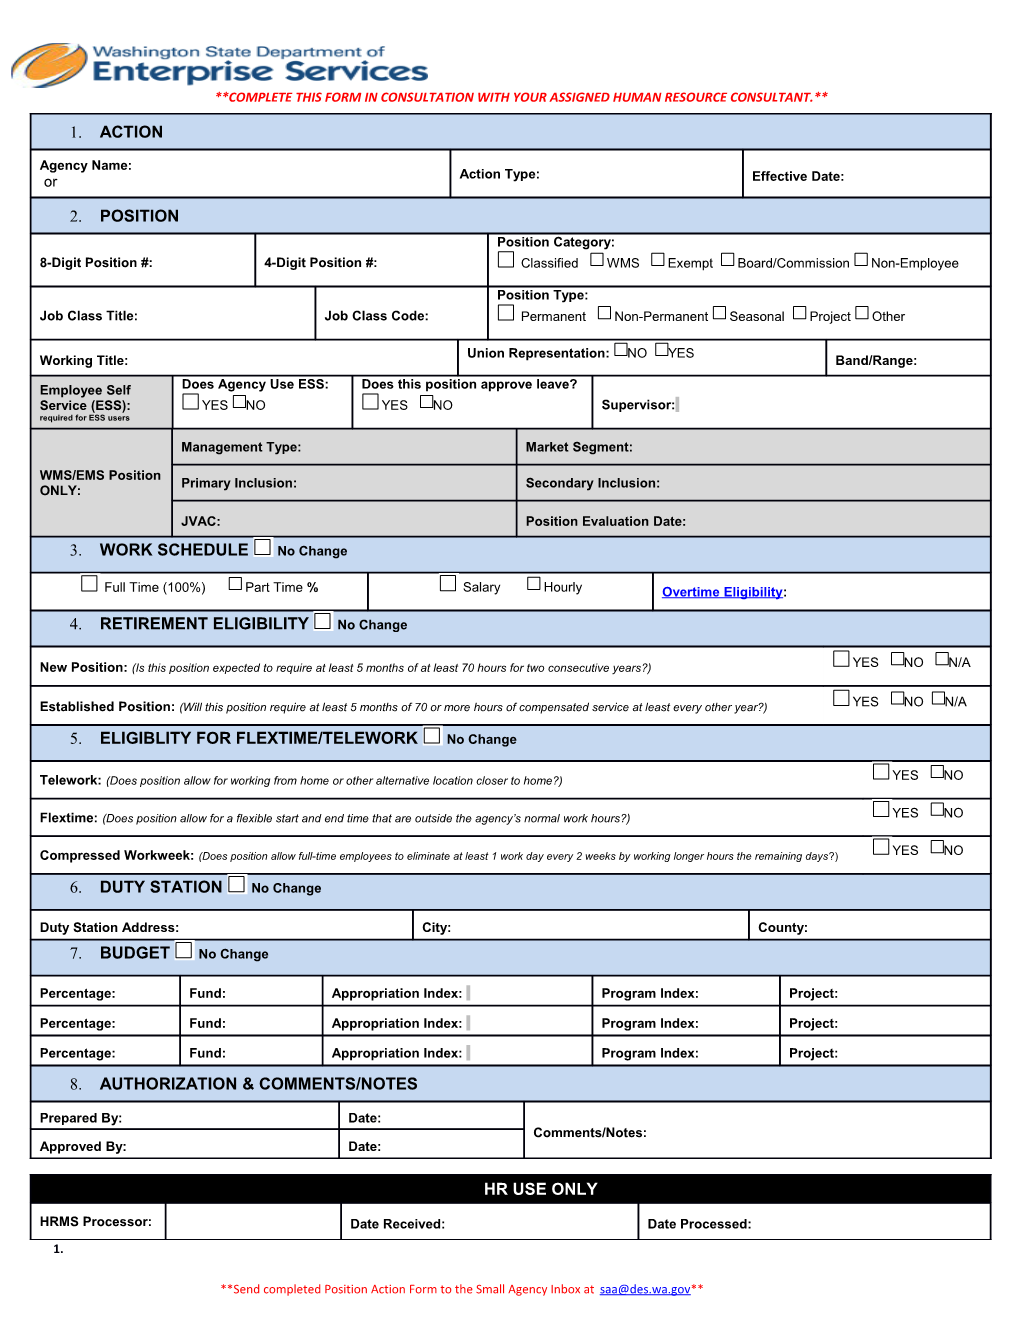 Complete This Form in Consultation with Your Assigned Human Resource Consultant